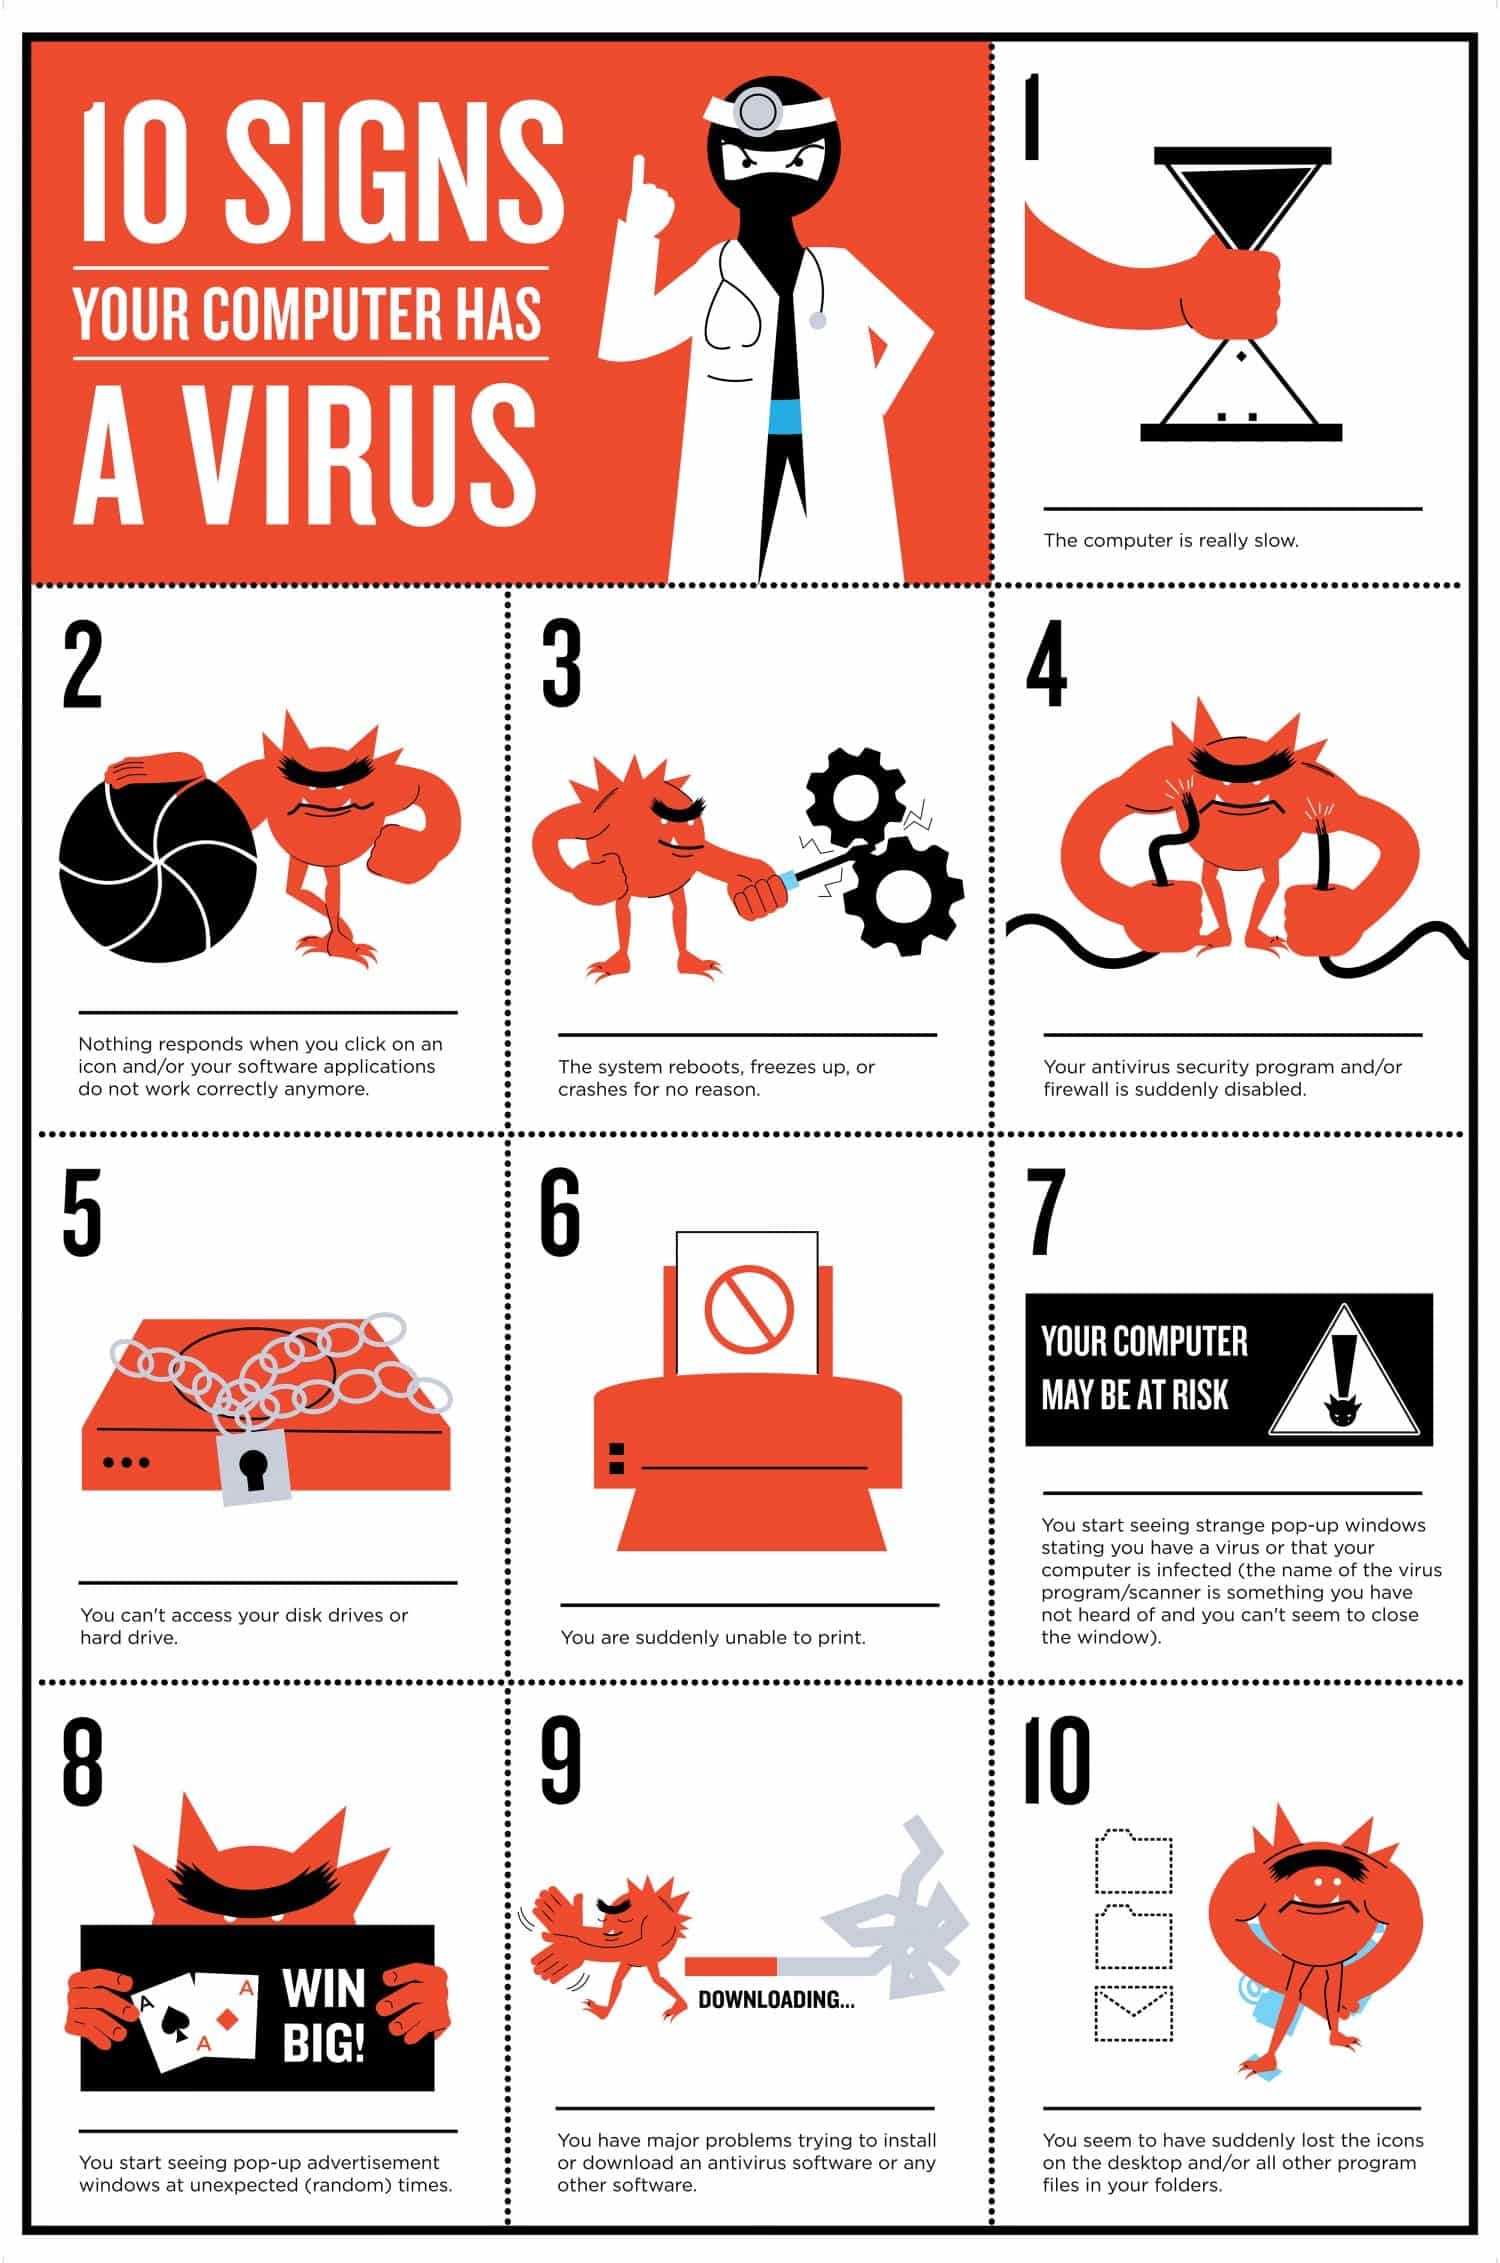 10 sure signs that your Windows computer has a virus » TechWorm